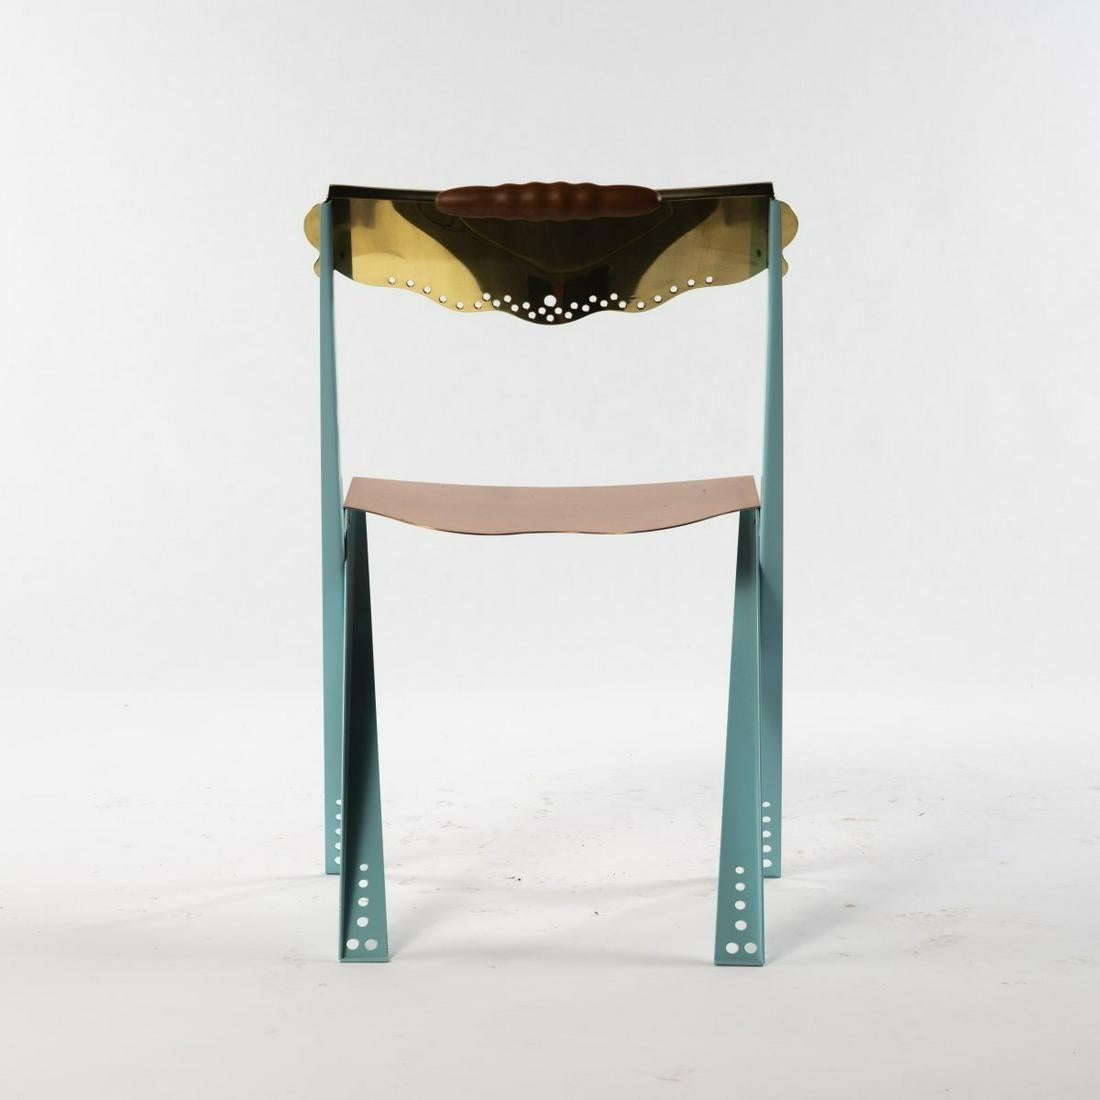 Chair 'Anebo Tak', 1987, H. 82 x 50.5 x 48 cm. Made by Borek Sipek for Driade, Milan. Sheet metal, painted turquoise, copper and brass, wooden handle. Marked: manufacturer's label., Irace, Driadebook, Milan 1995.

